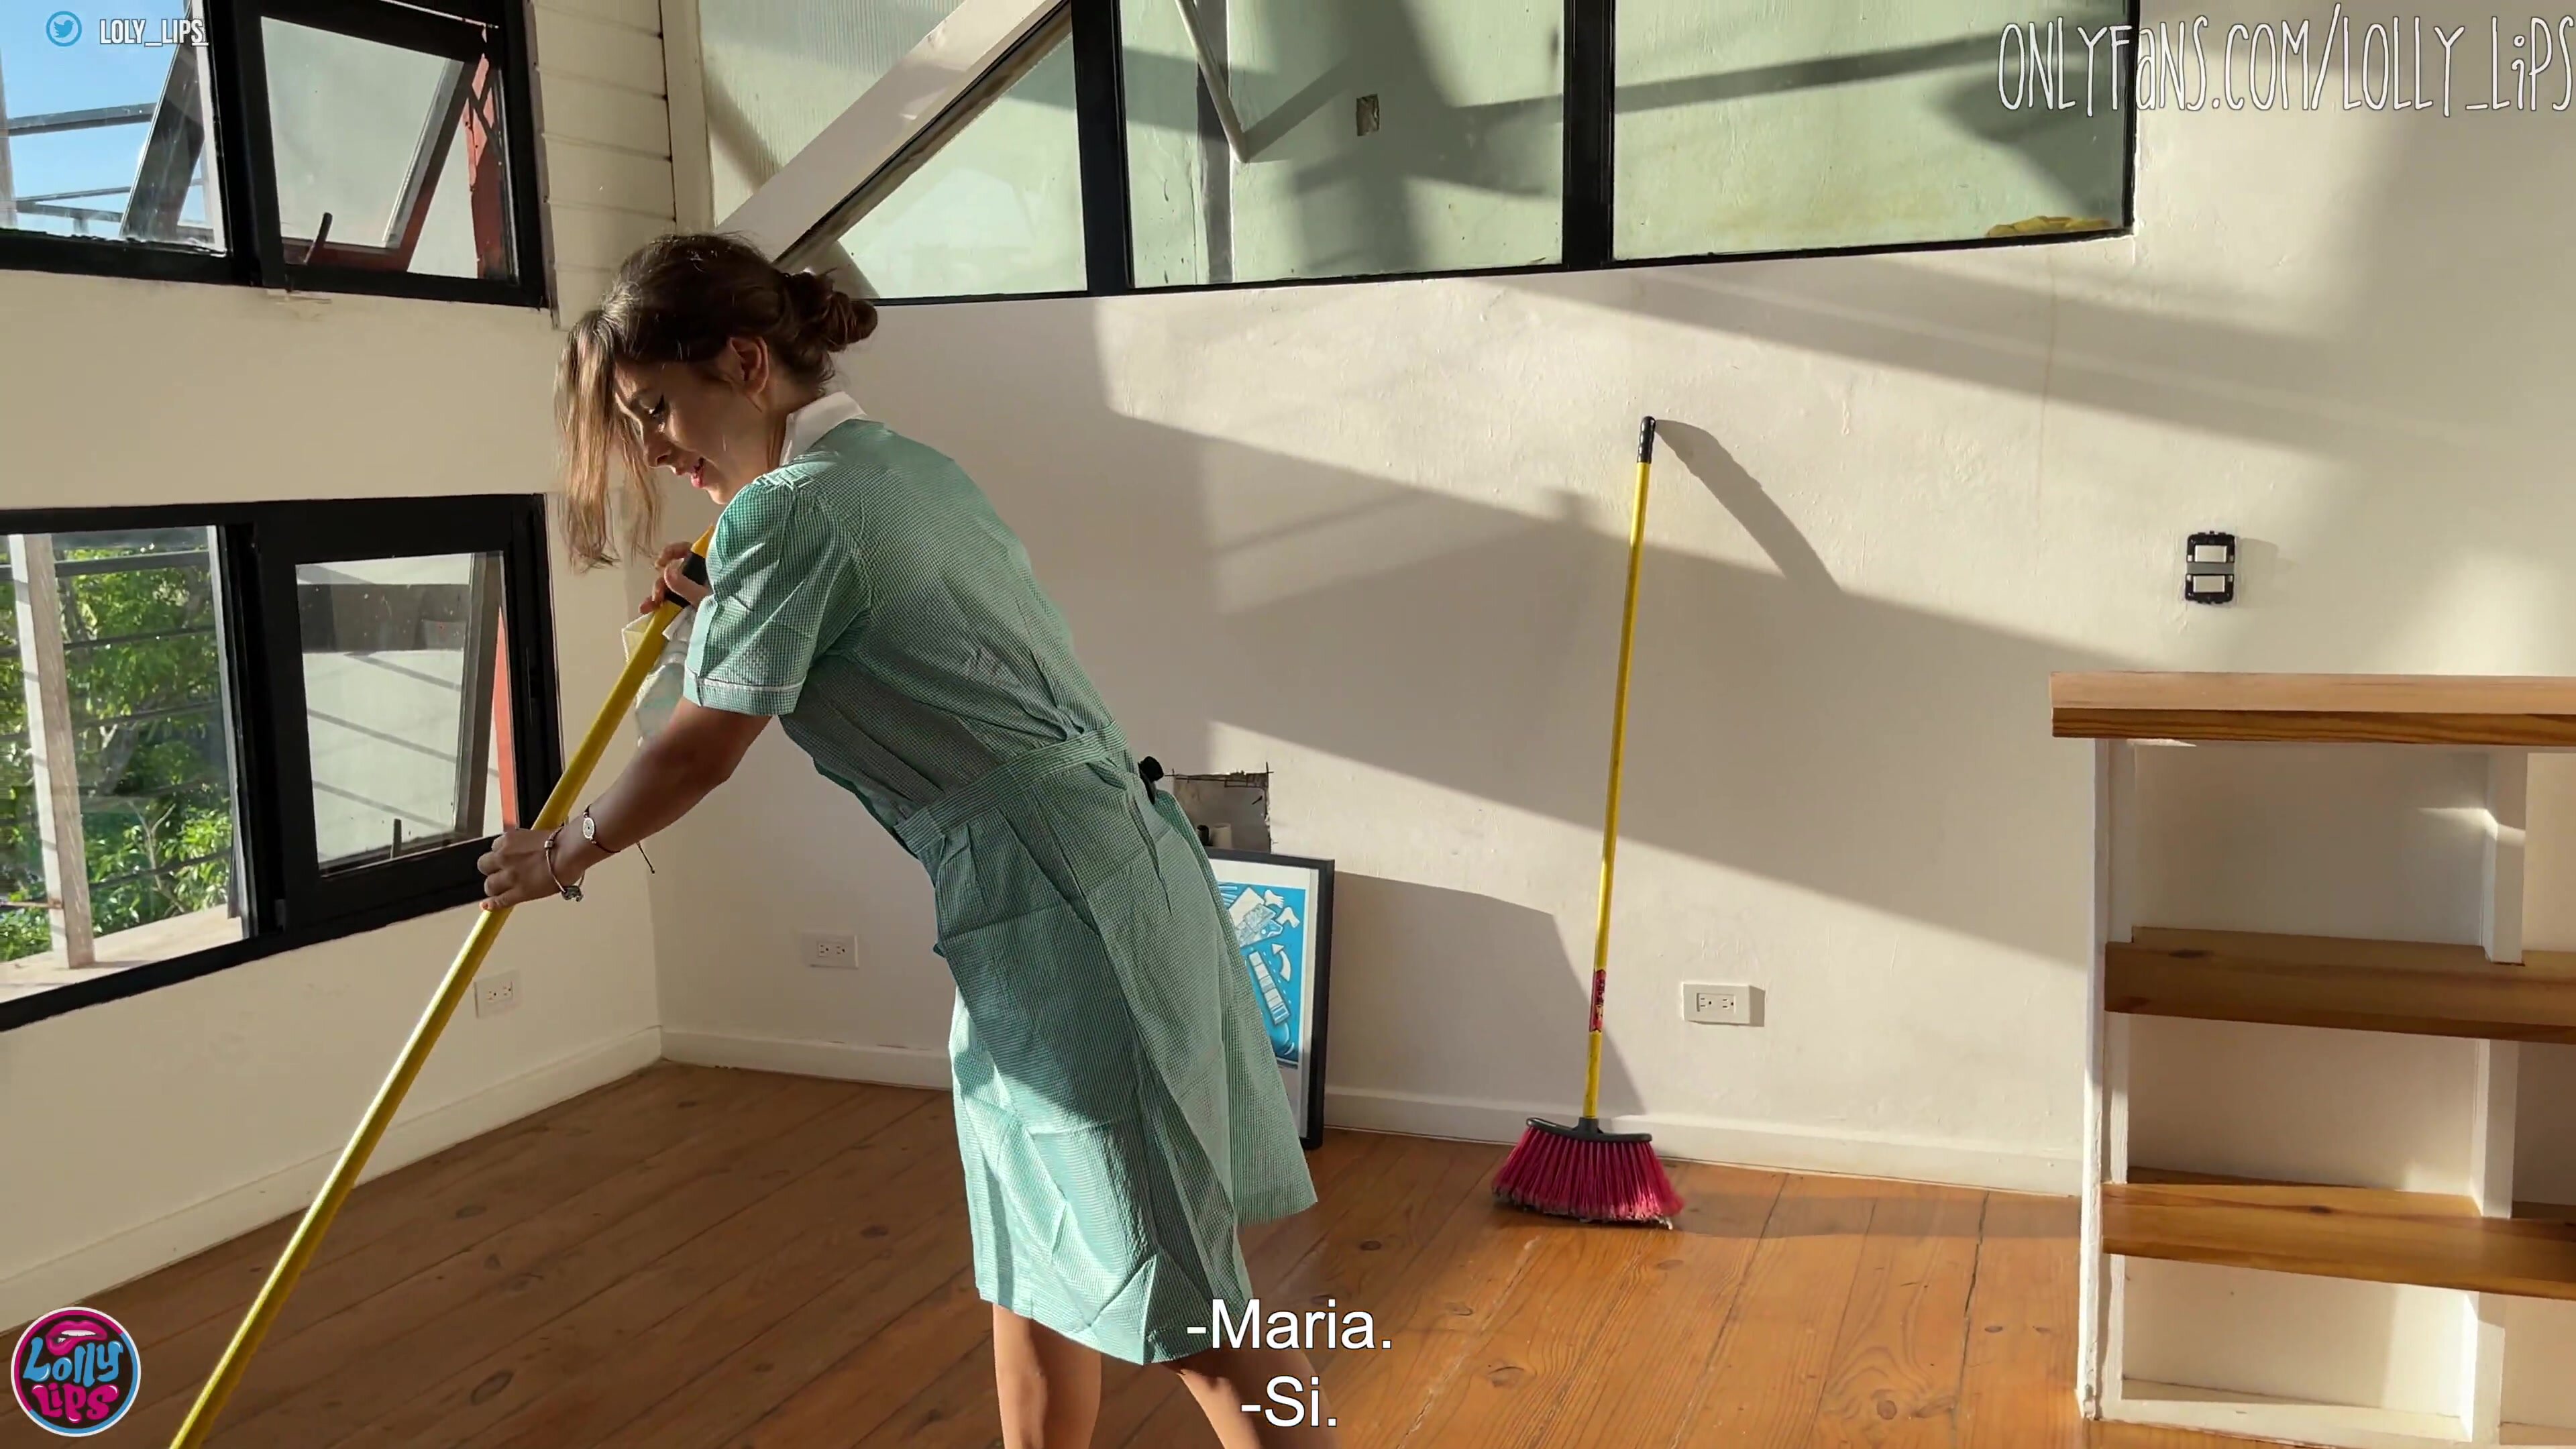 Loly Lips - My Cleaning Lady Maria Knows Only Love's Language